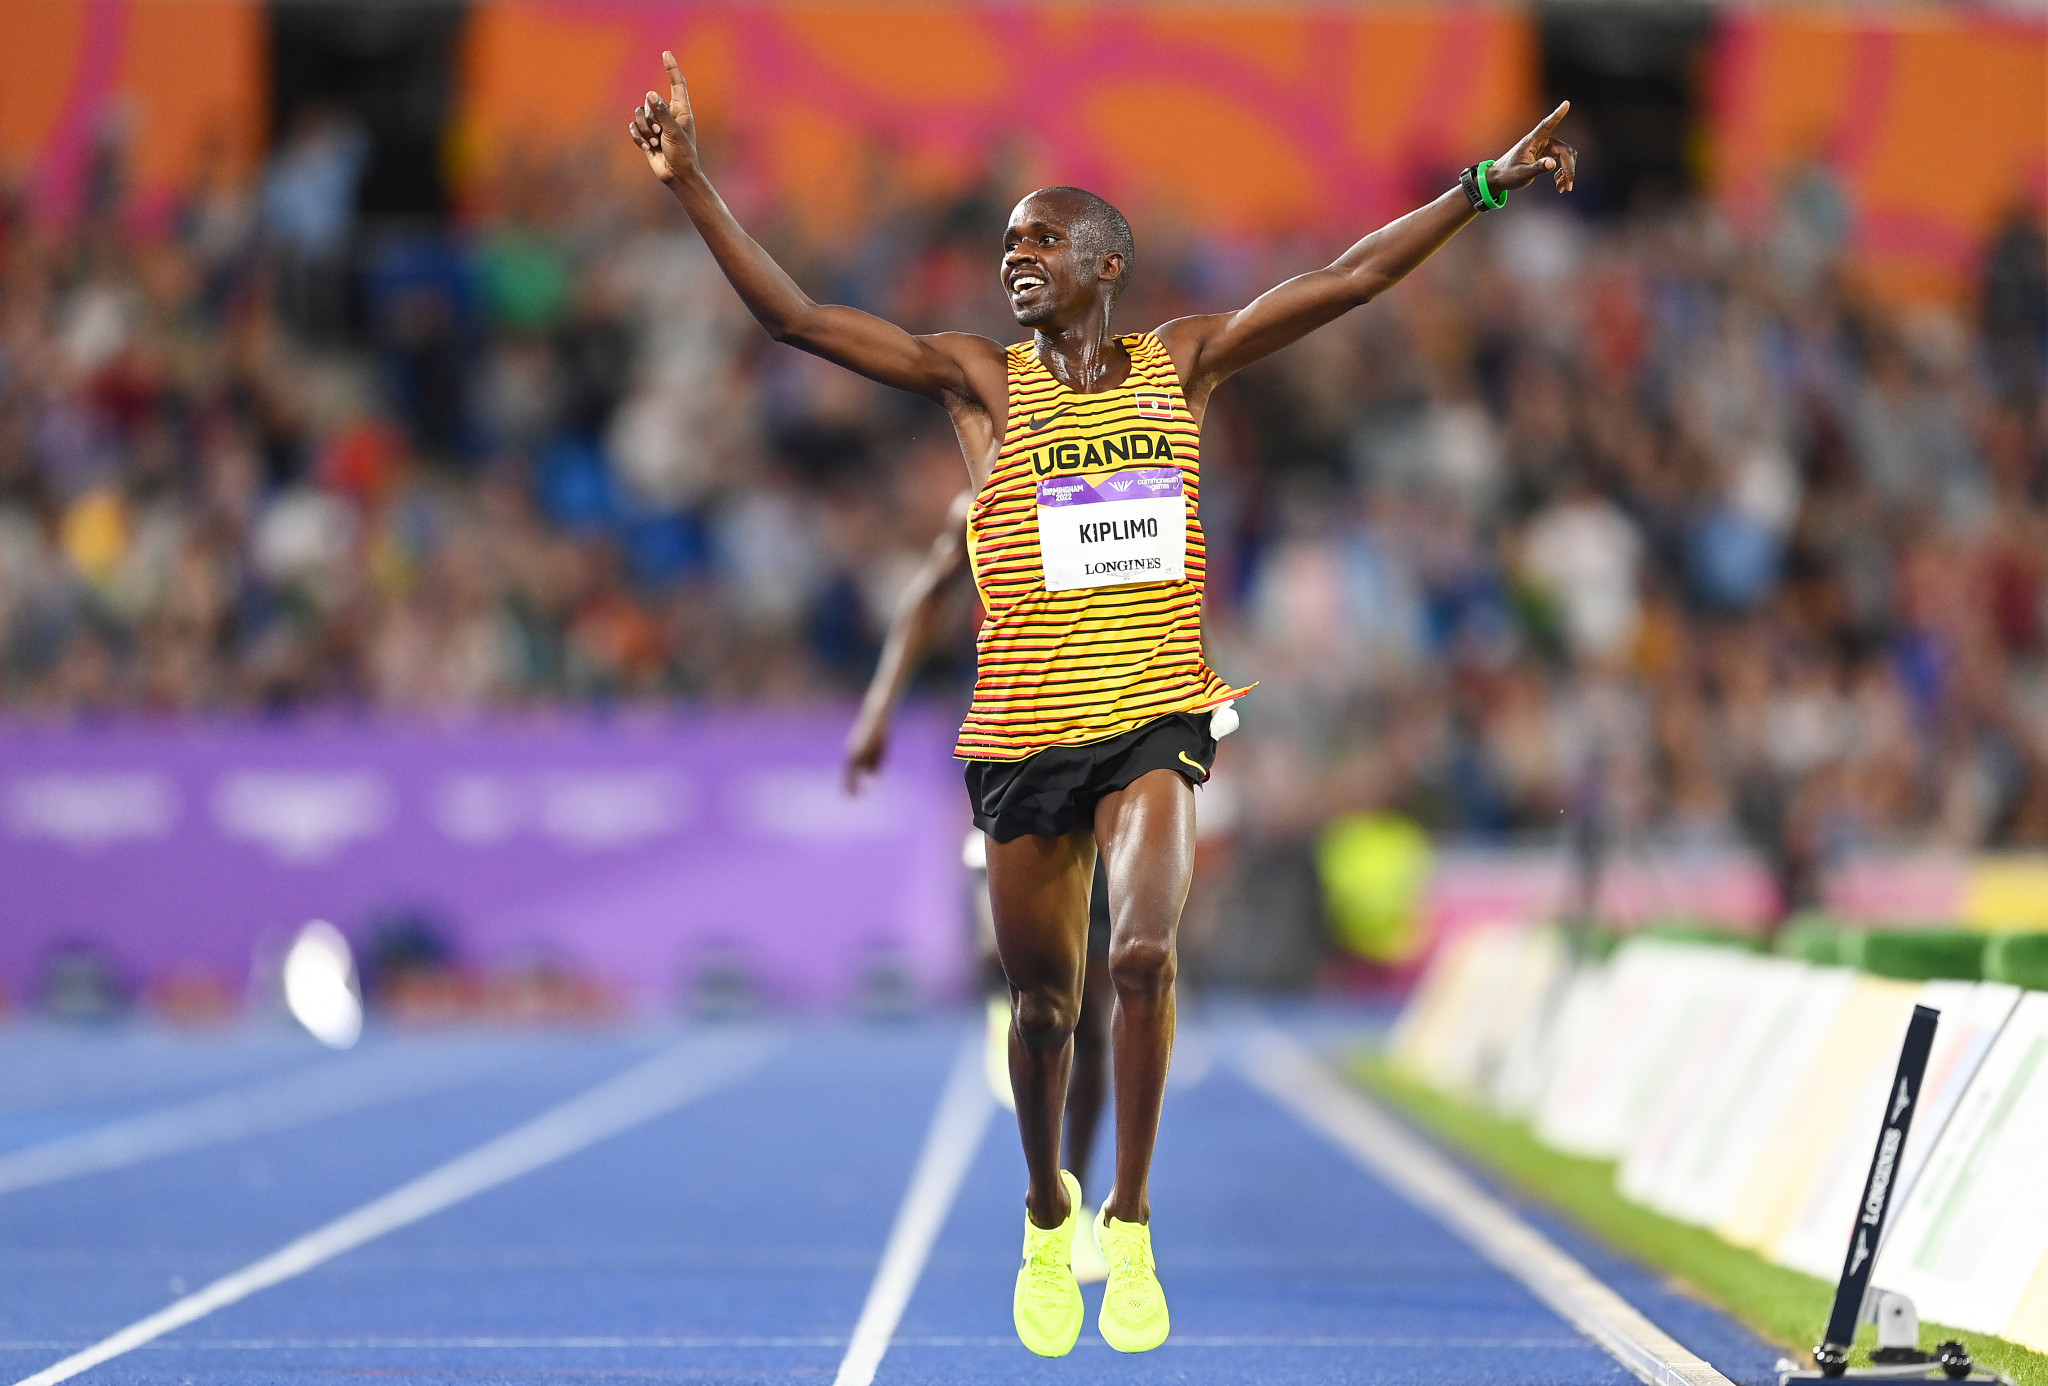 Jacob Kiplimo won the men's 10,000 metres on the opening day of track and field ©Getty Images